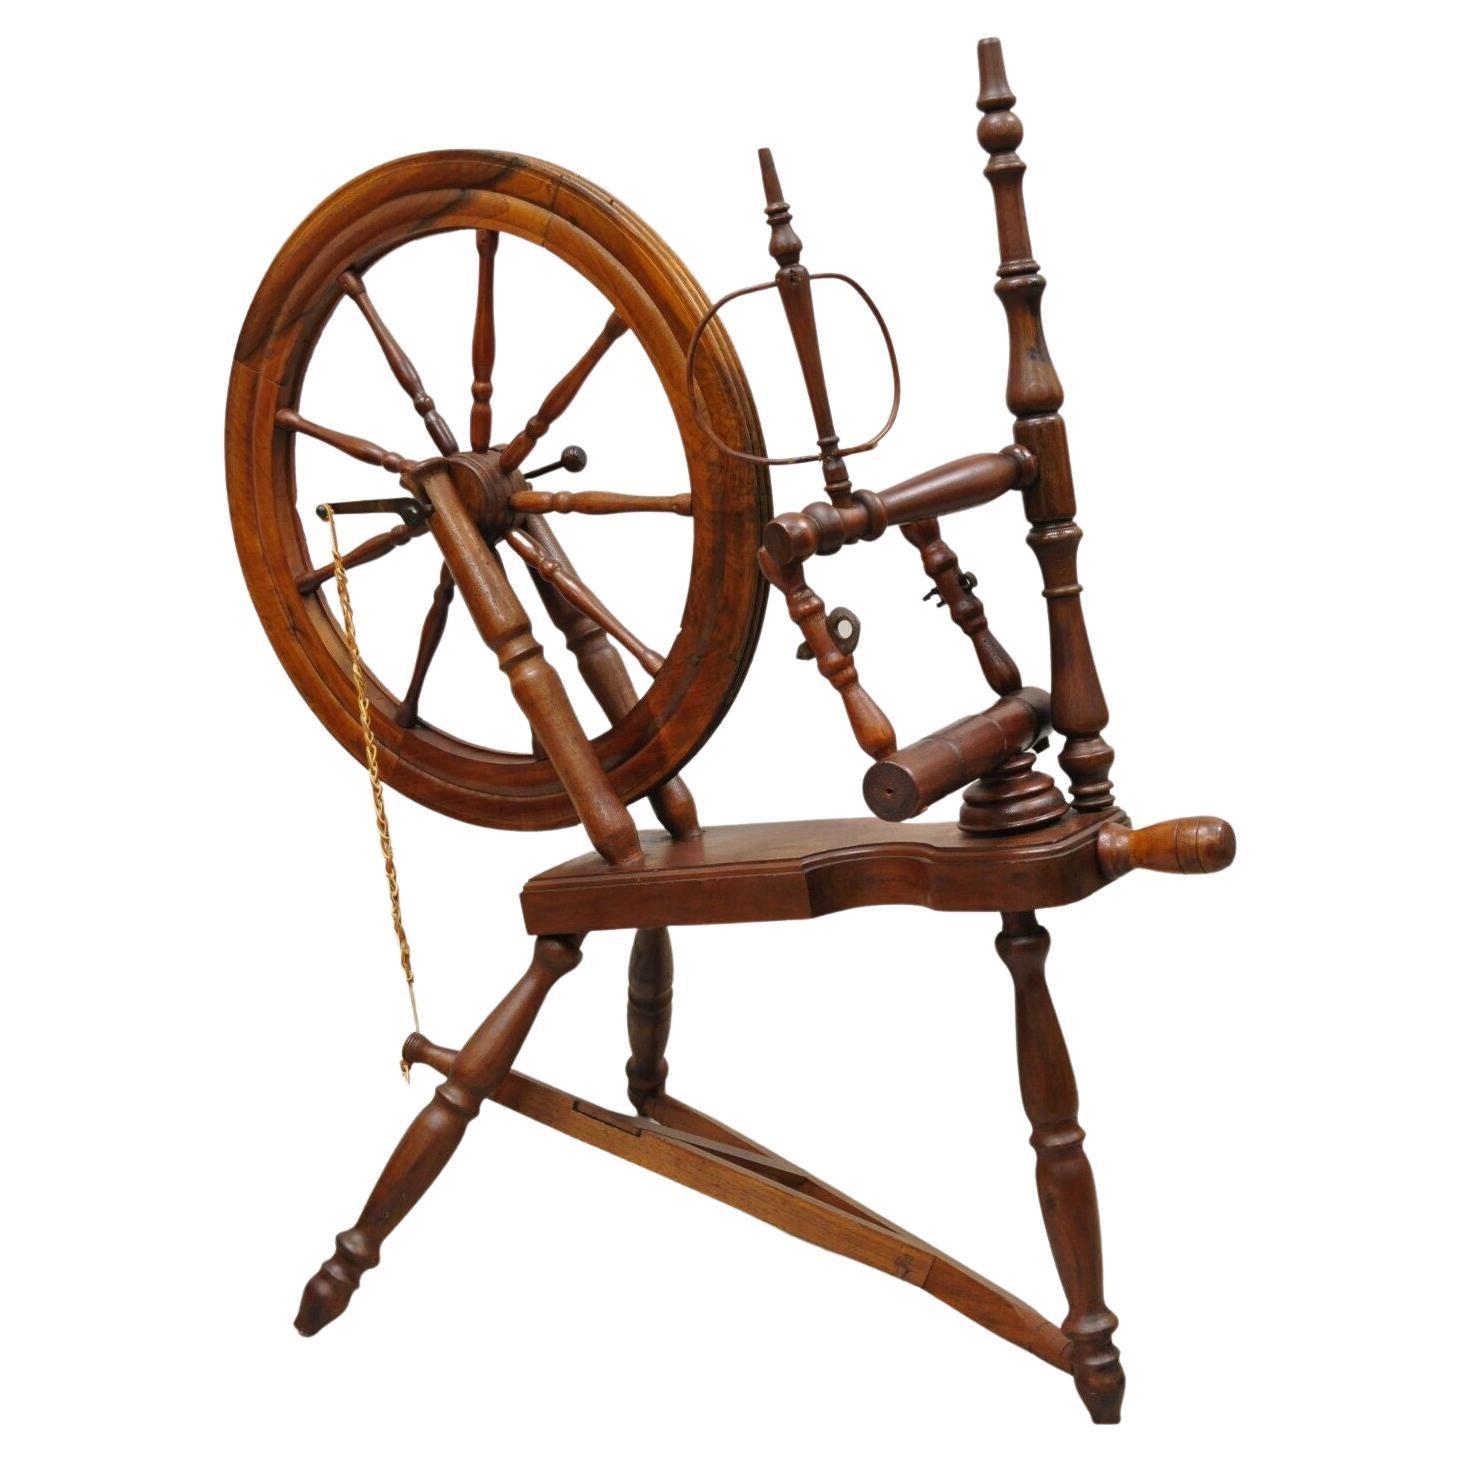 Antique Canadian Country Primitive Wooden Colonial Spinning Wheel For Sale